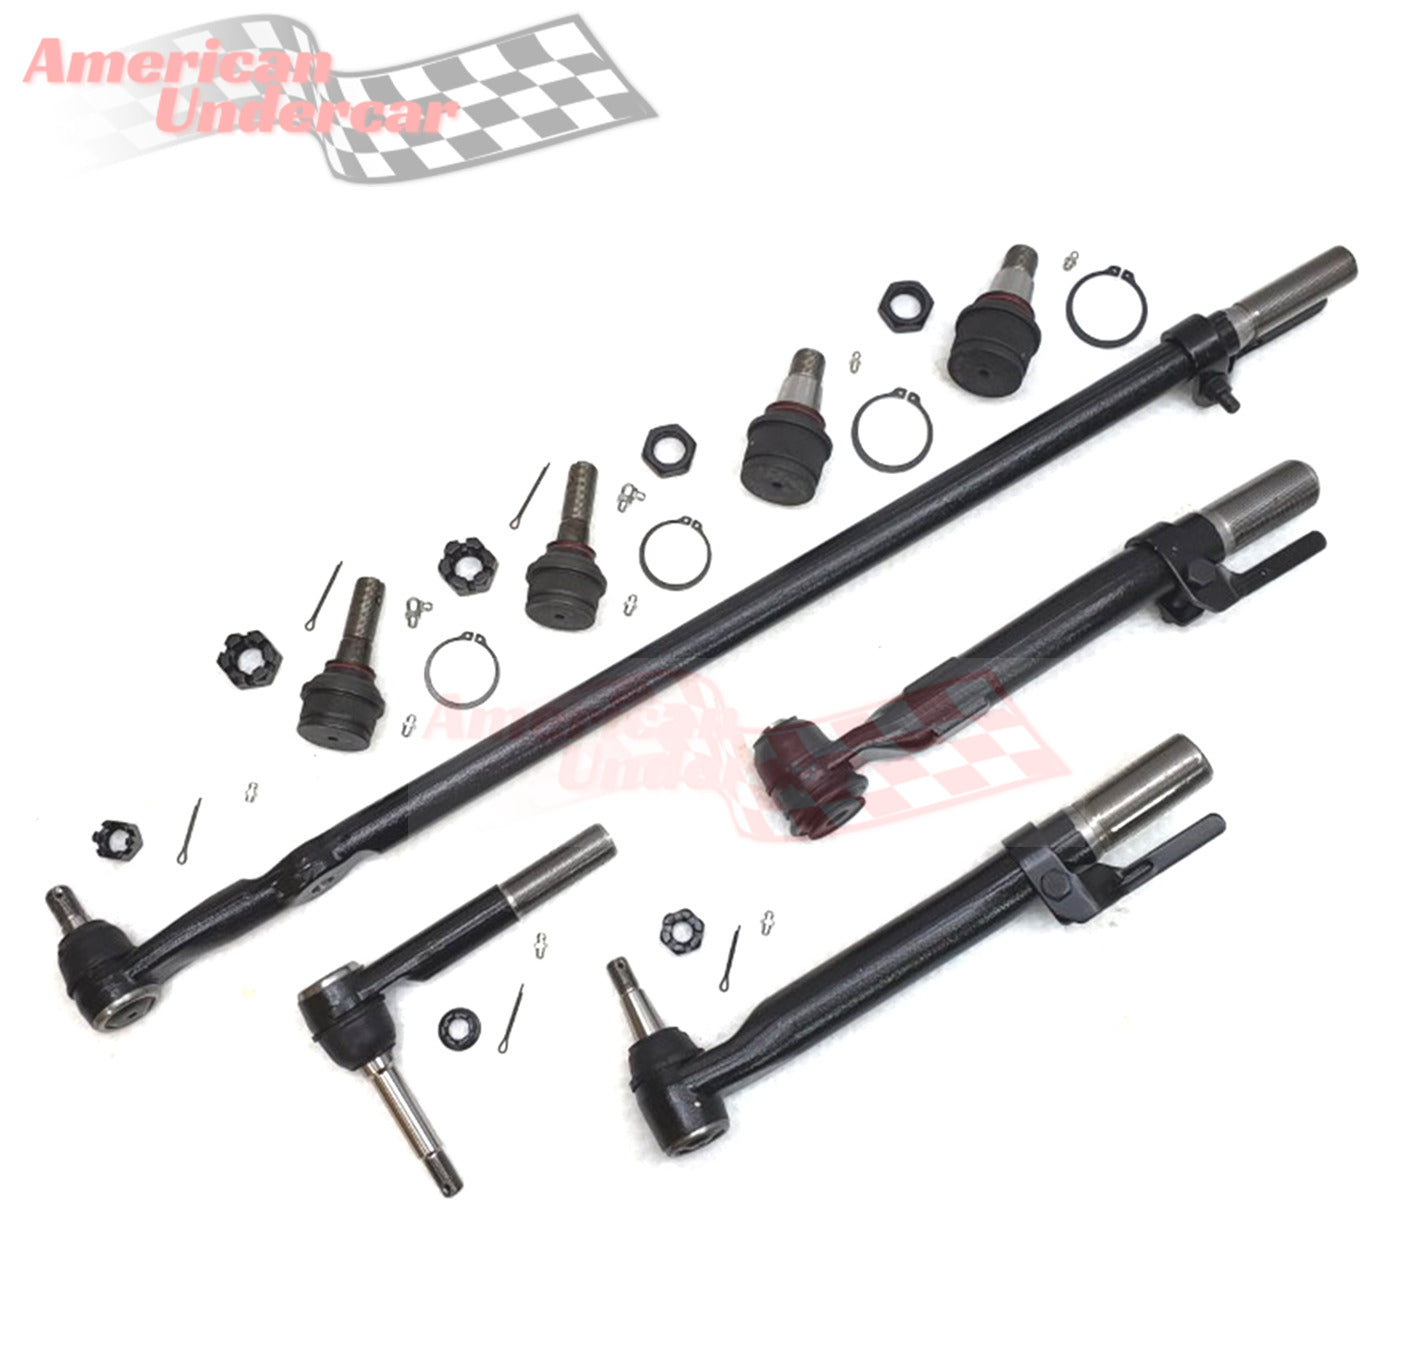 XRF Ford F350 Super Duty WIDE AXLE Steering and Suspension Kit 2017 - 2022 4x4